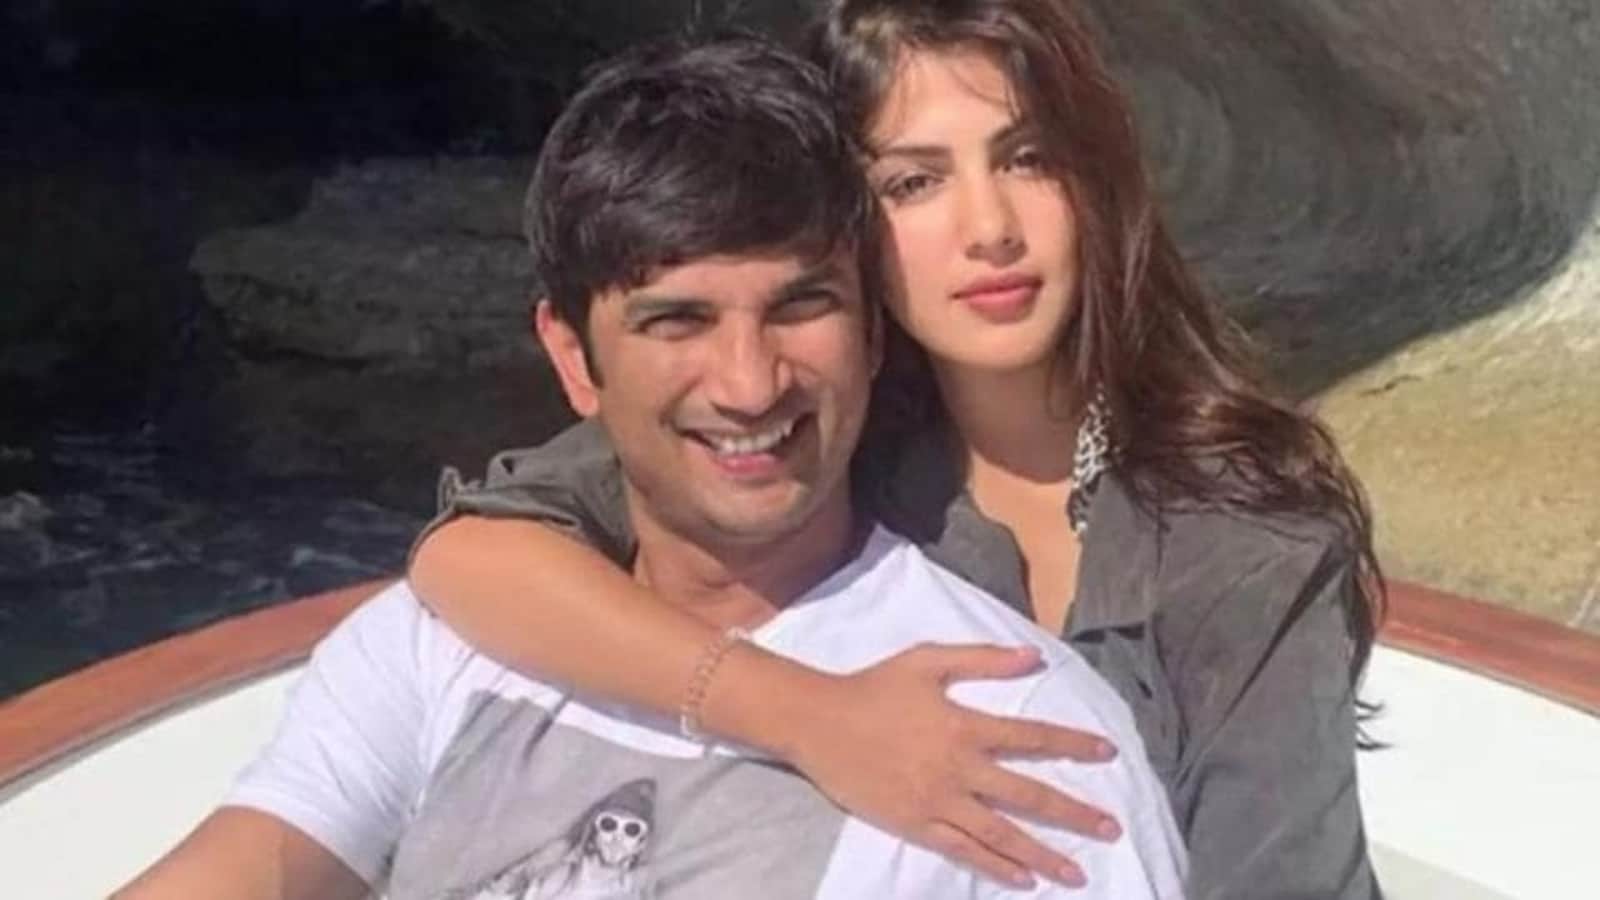 Did Rhea Chakraborty ‘supply drugs' to Sushant Singh Rajput? Here's what the actress has to say